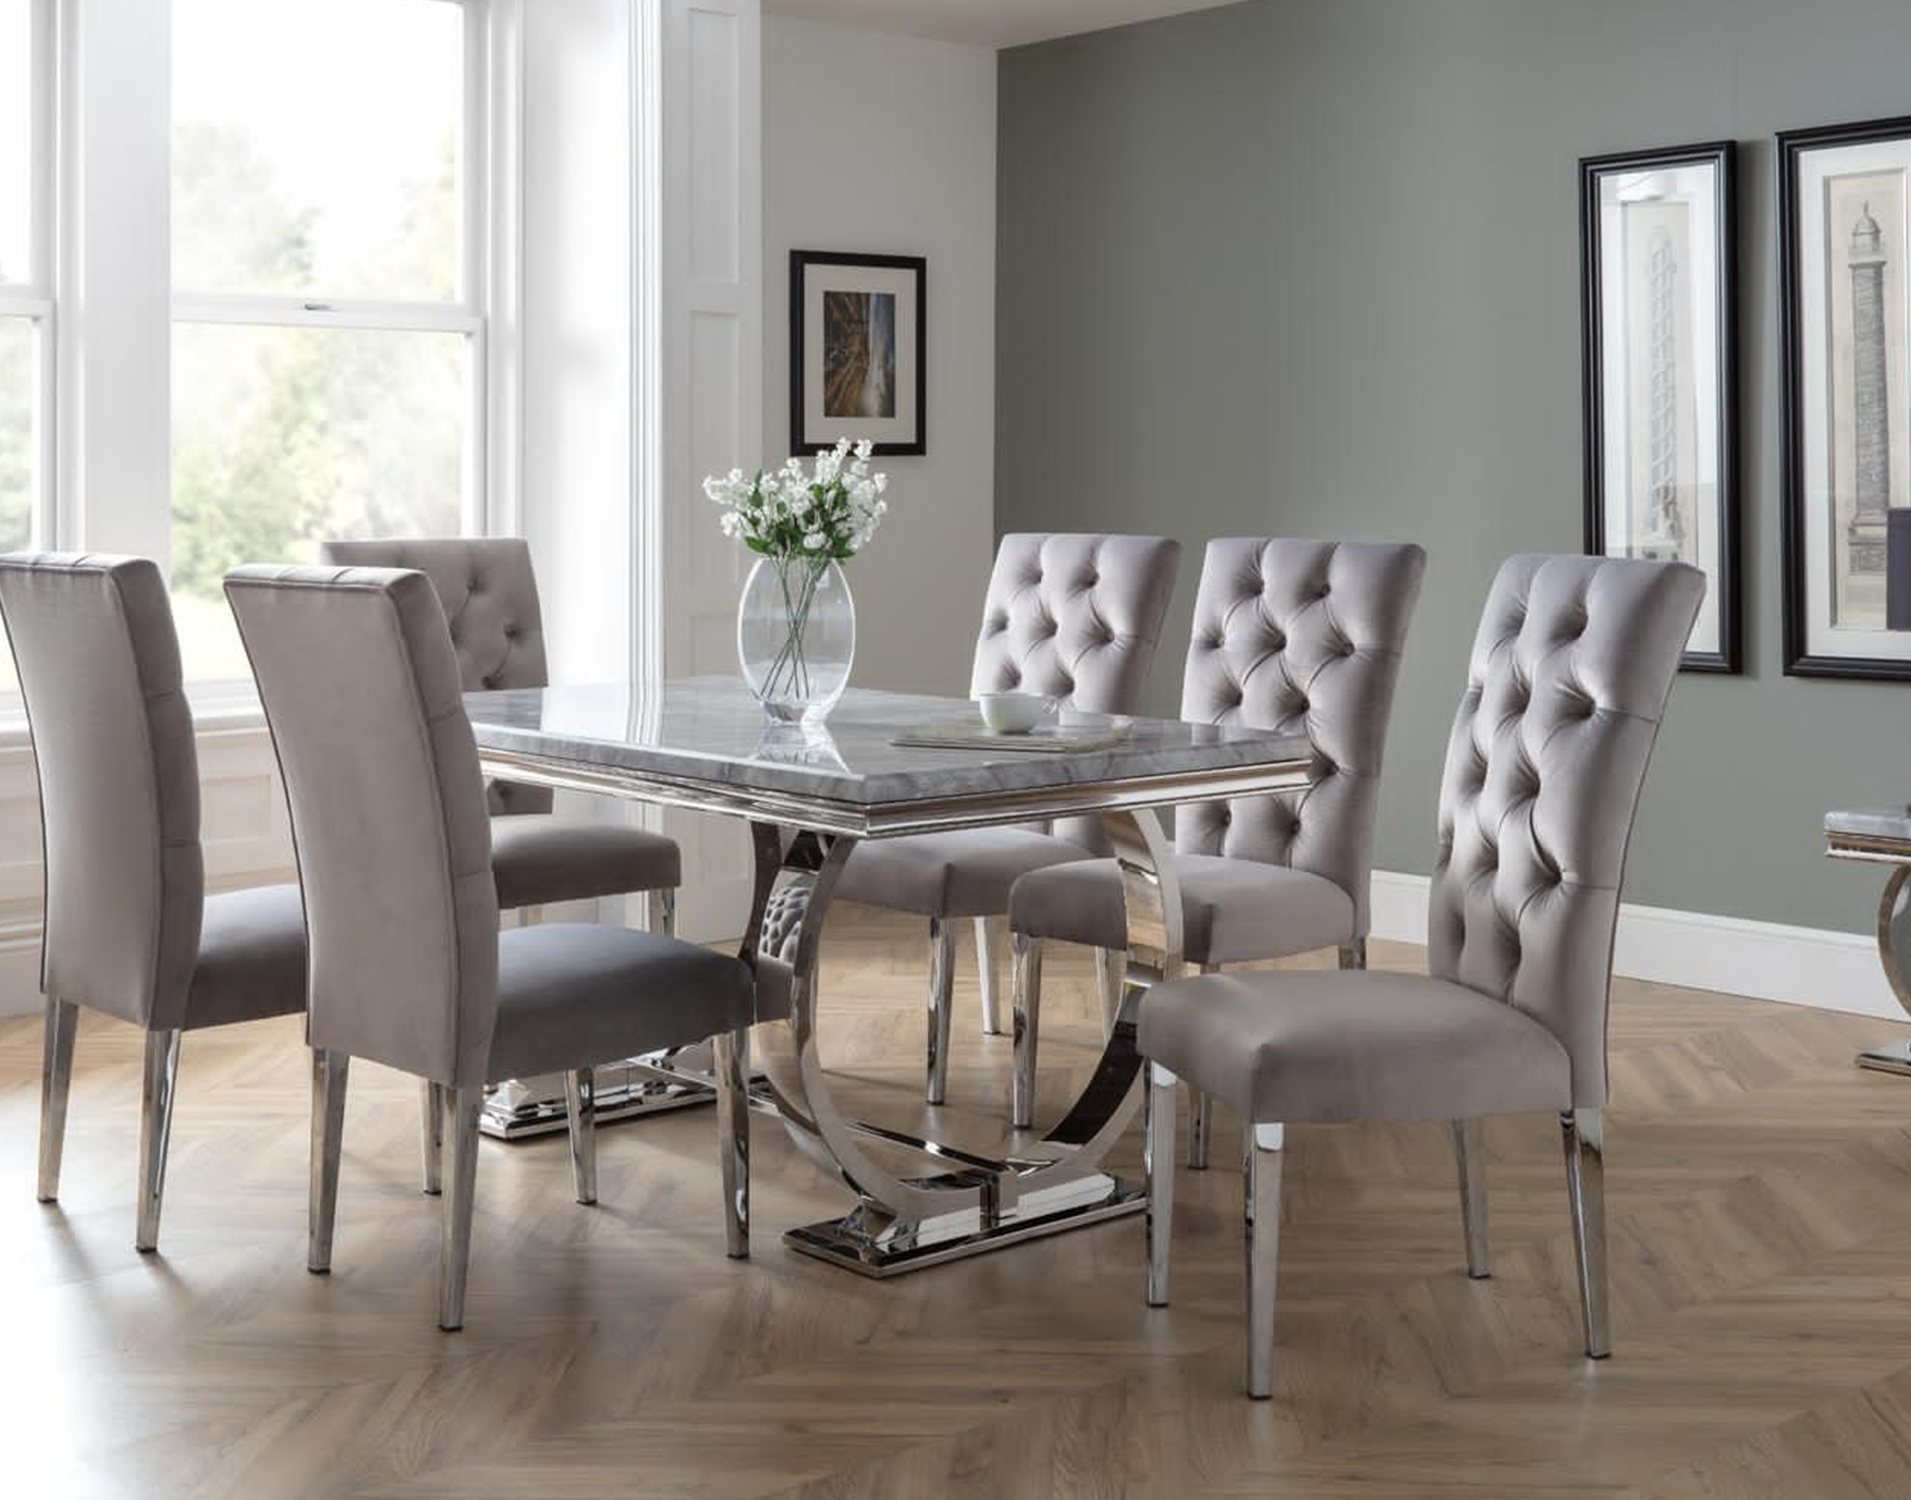 Dining Room Table And Chairs Ireland